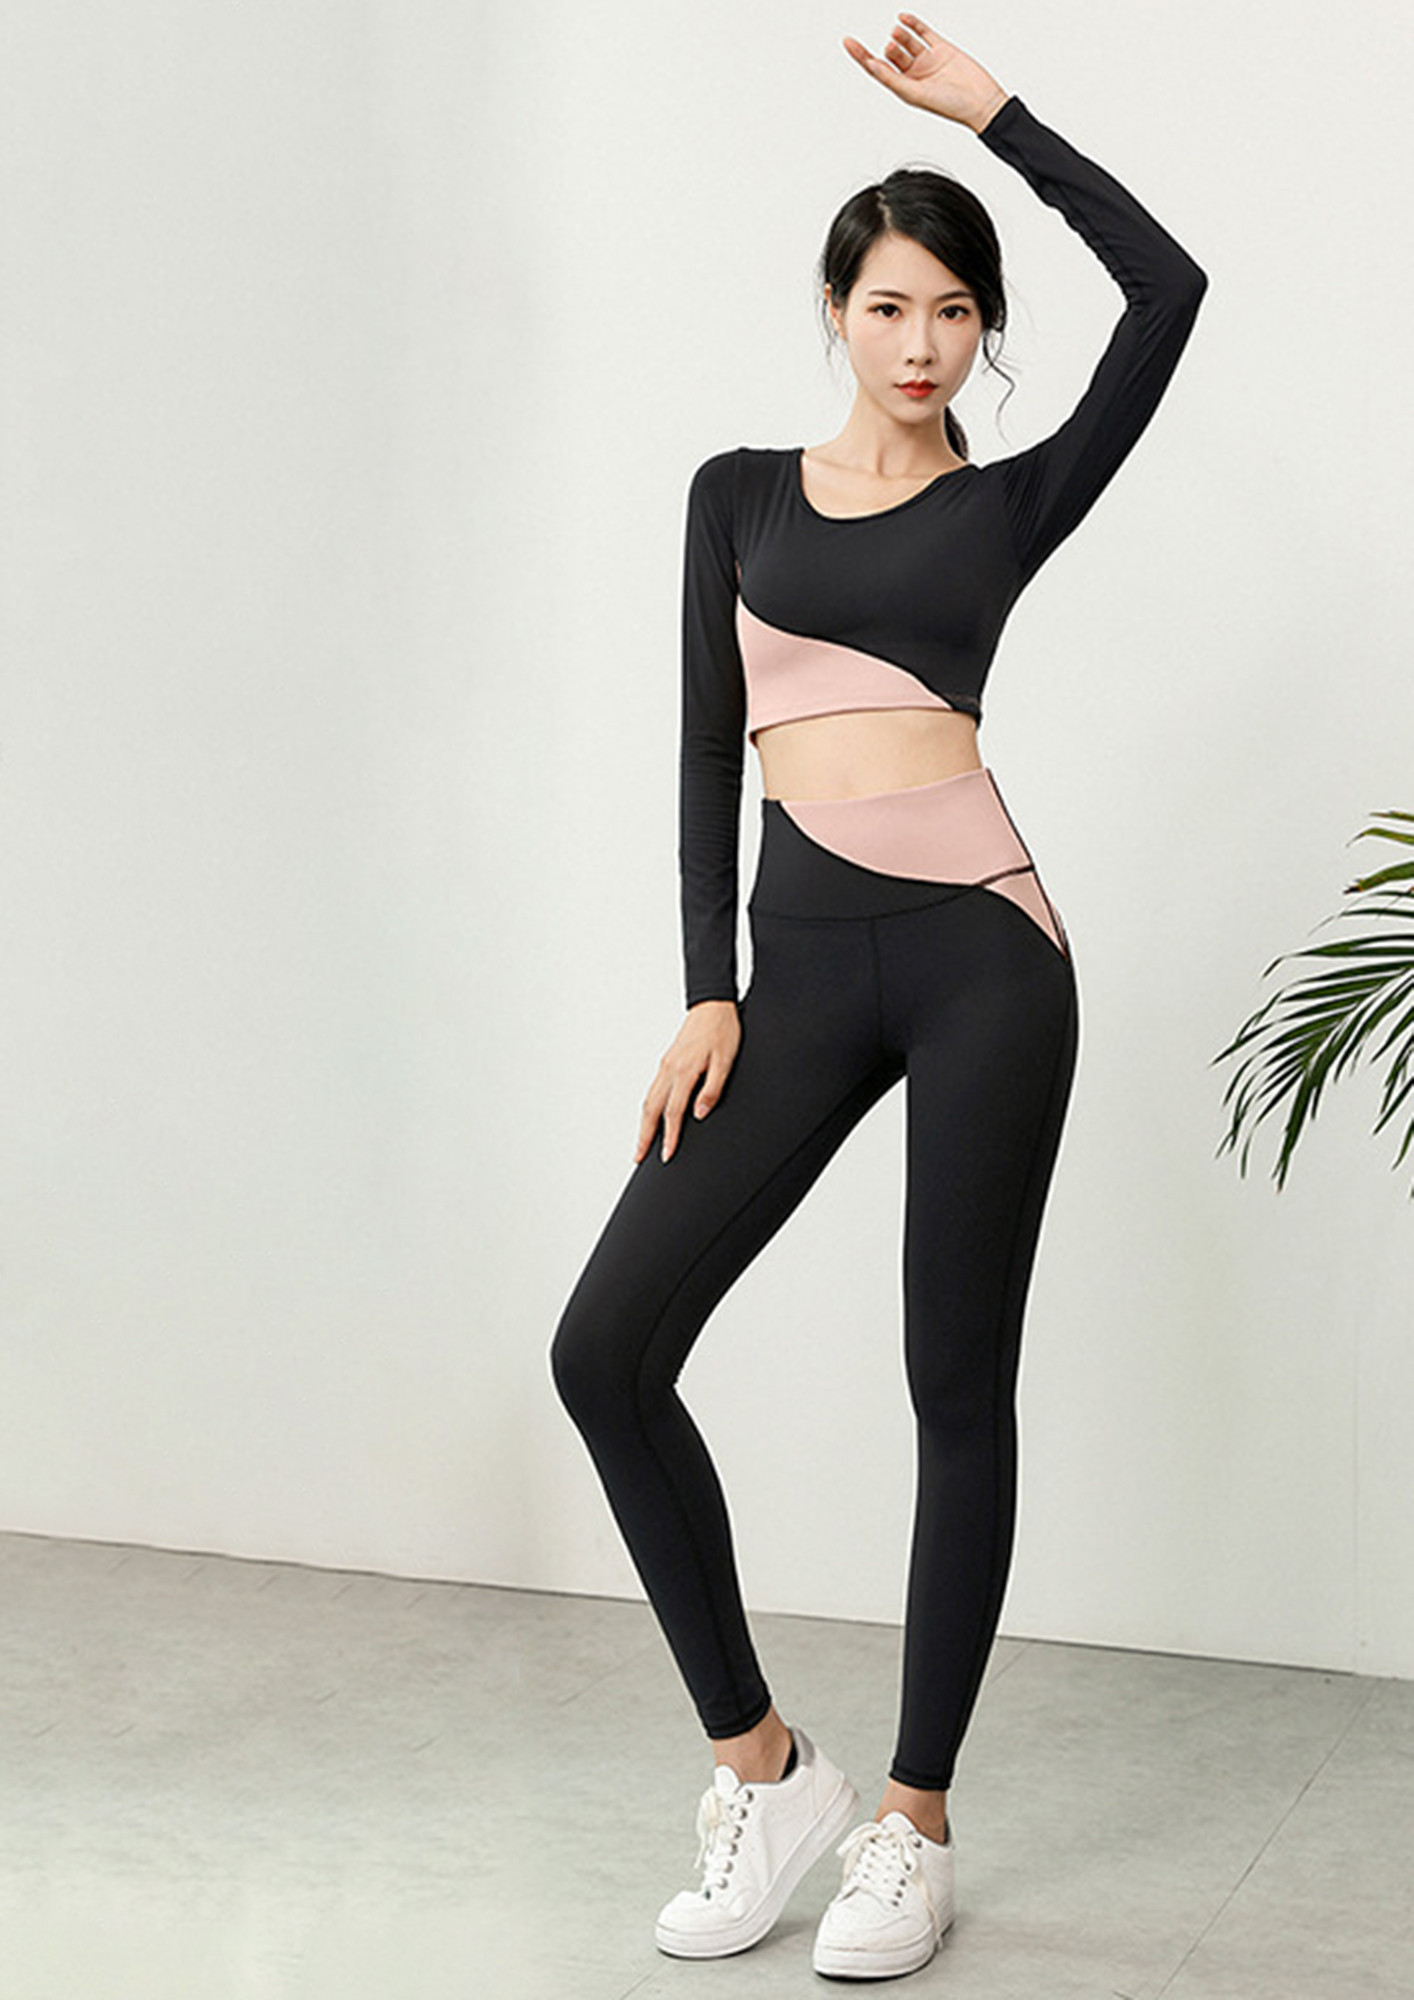 CLASSY AND ELEGANT PINK TWO PIECE ACTIVE WEAR